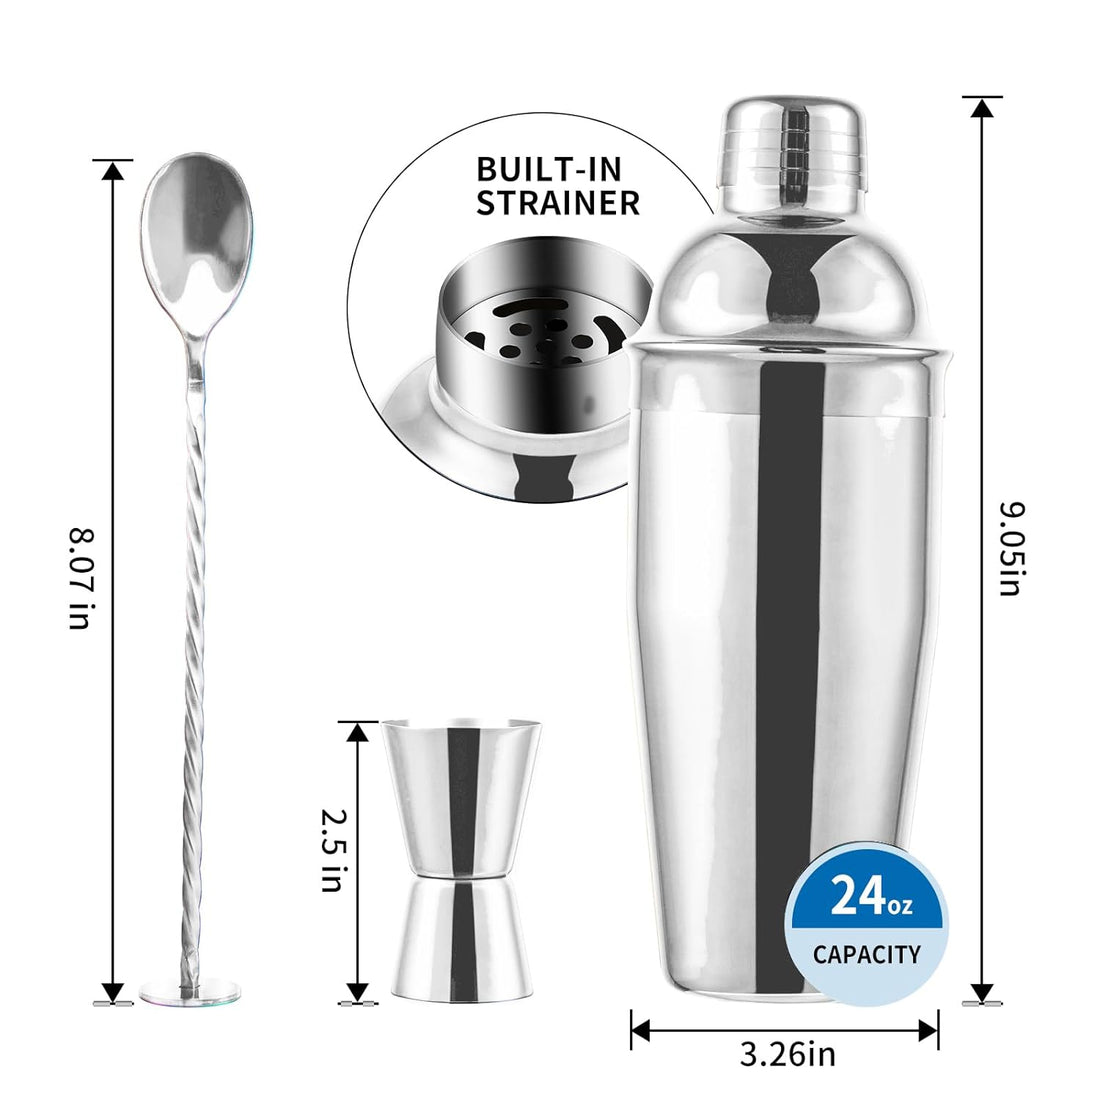 Safring 24oz Cocktail Shaker Bar Set, Martini Shaker with Built-in Strainer, Measuring Jigger, Mixing Spoon, Professional Stainless Steel Large Bartender Drink Shaker Margarita Alcohol Mixer-Silver